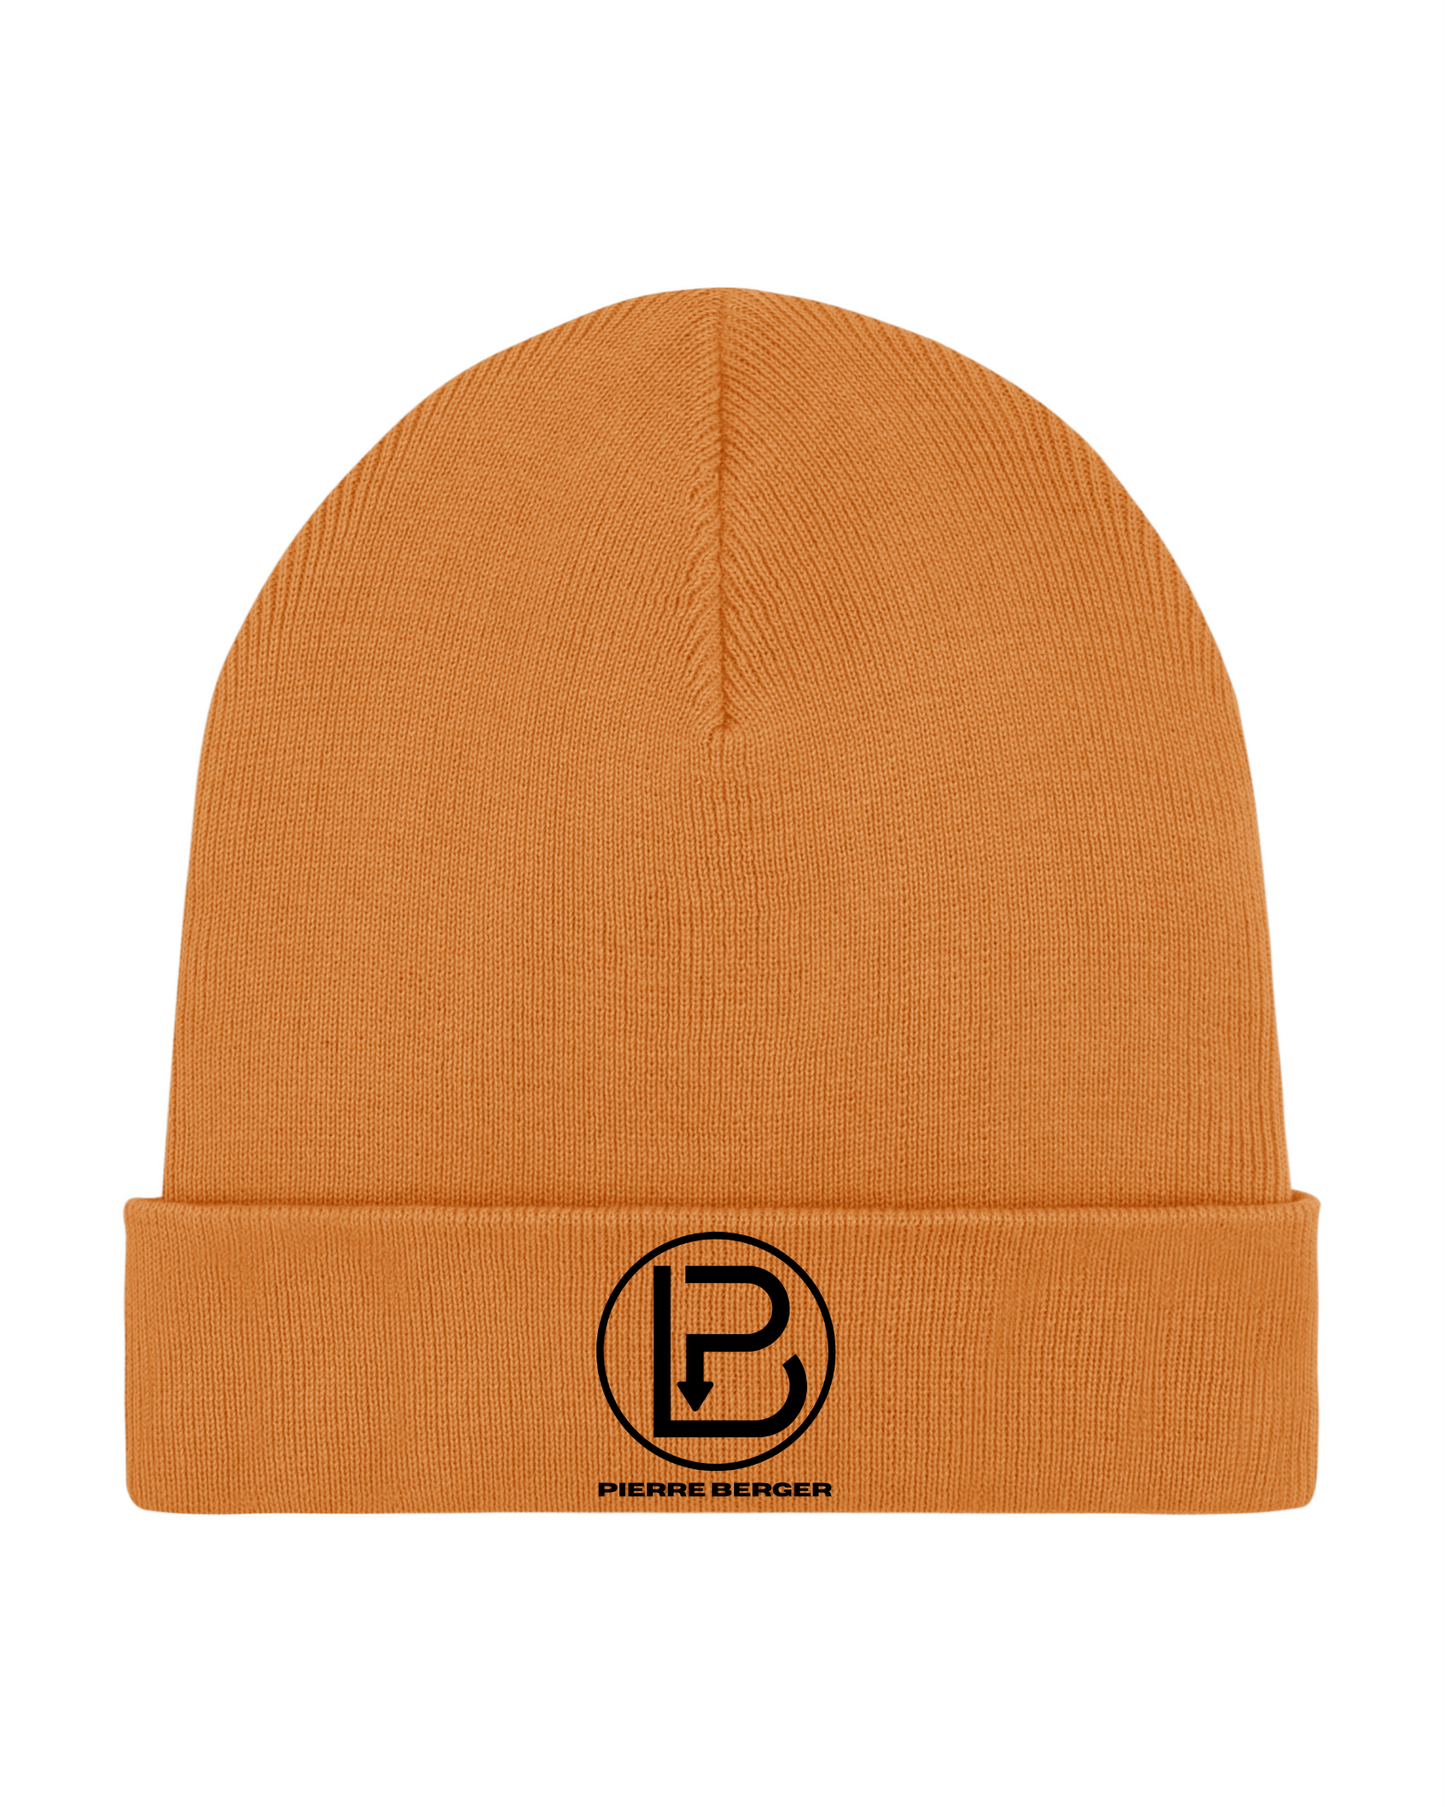 PIERRE BERGER - Knit Beanie 100% Recycled Stick